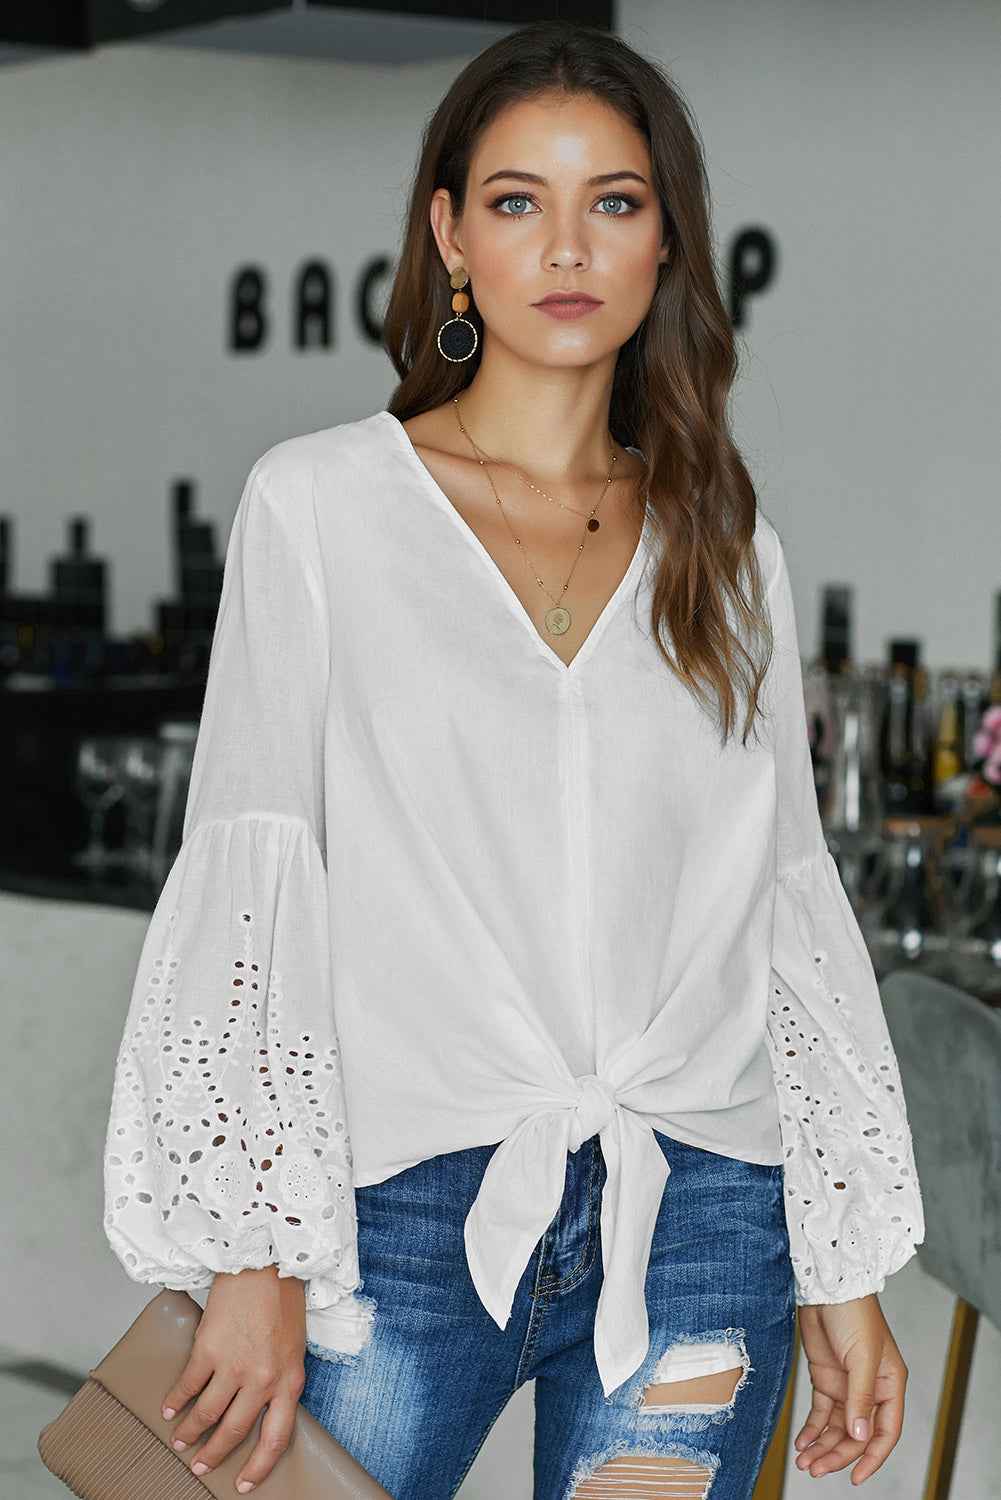 White Women's Casual Autumn Balloon Sleeve Tie Top V Neck Blouse Loose Shirts LC252264-1